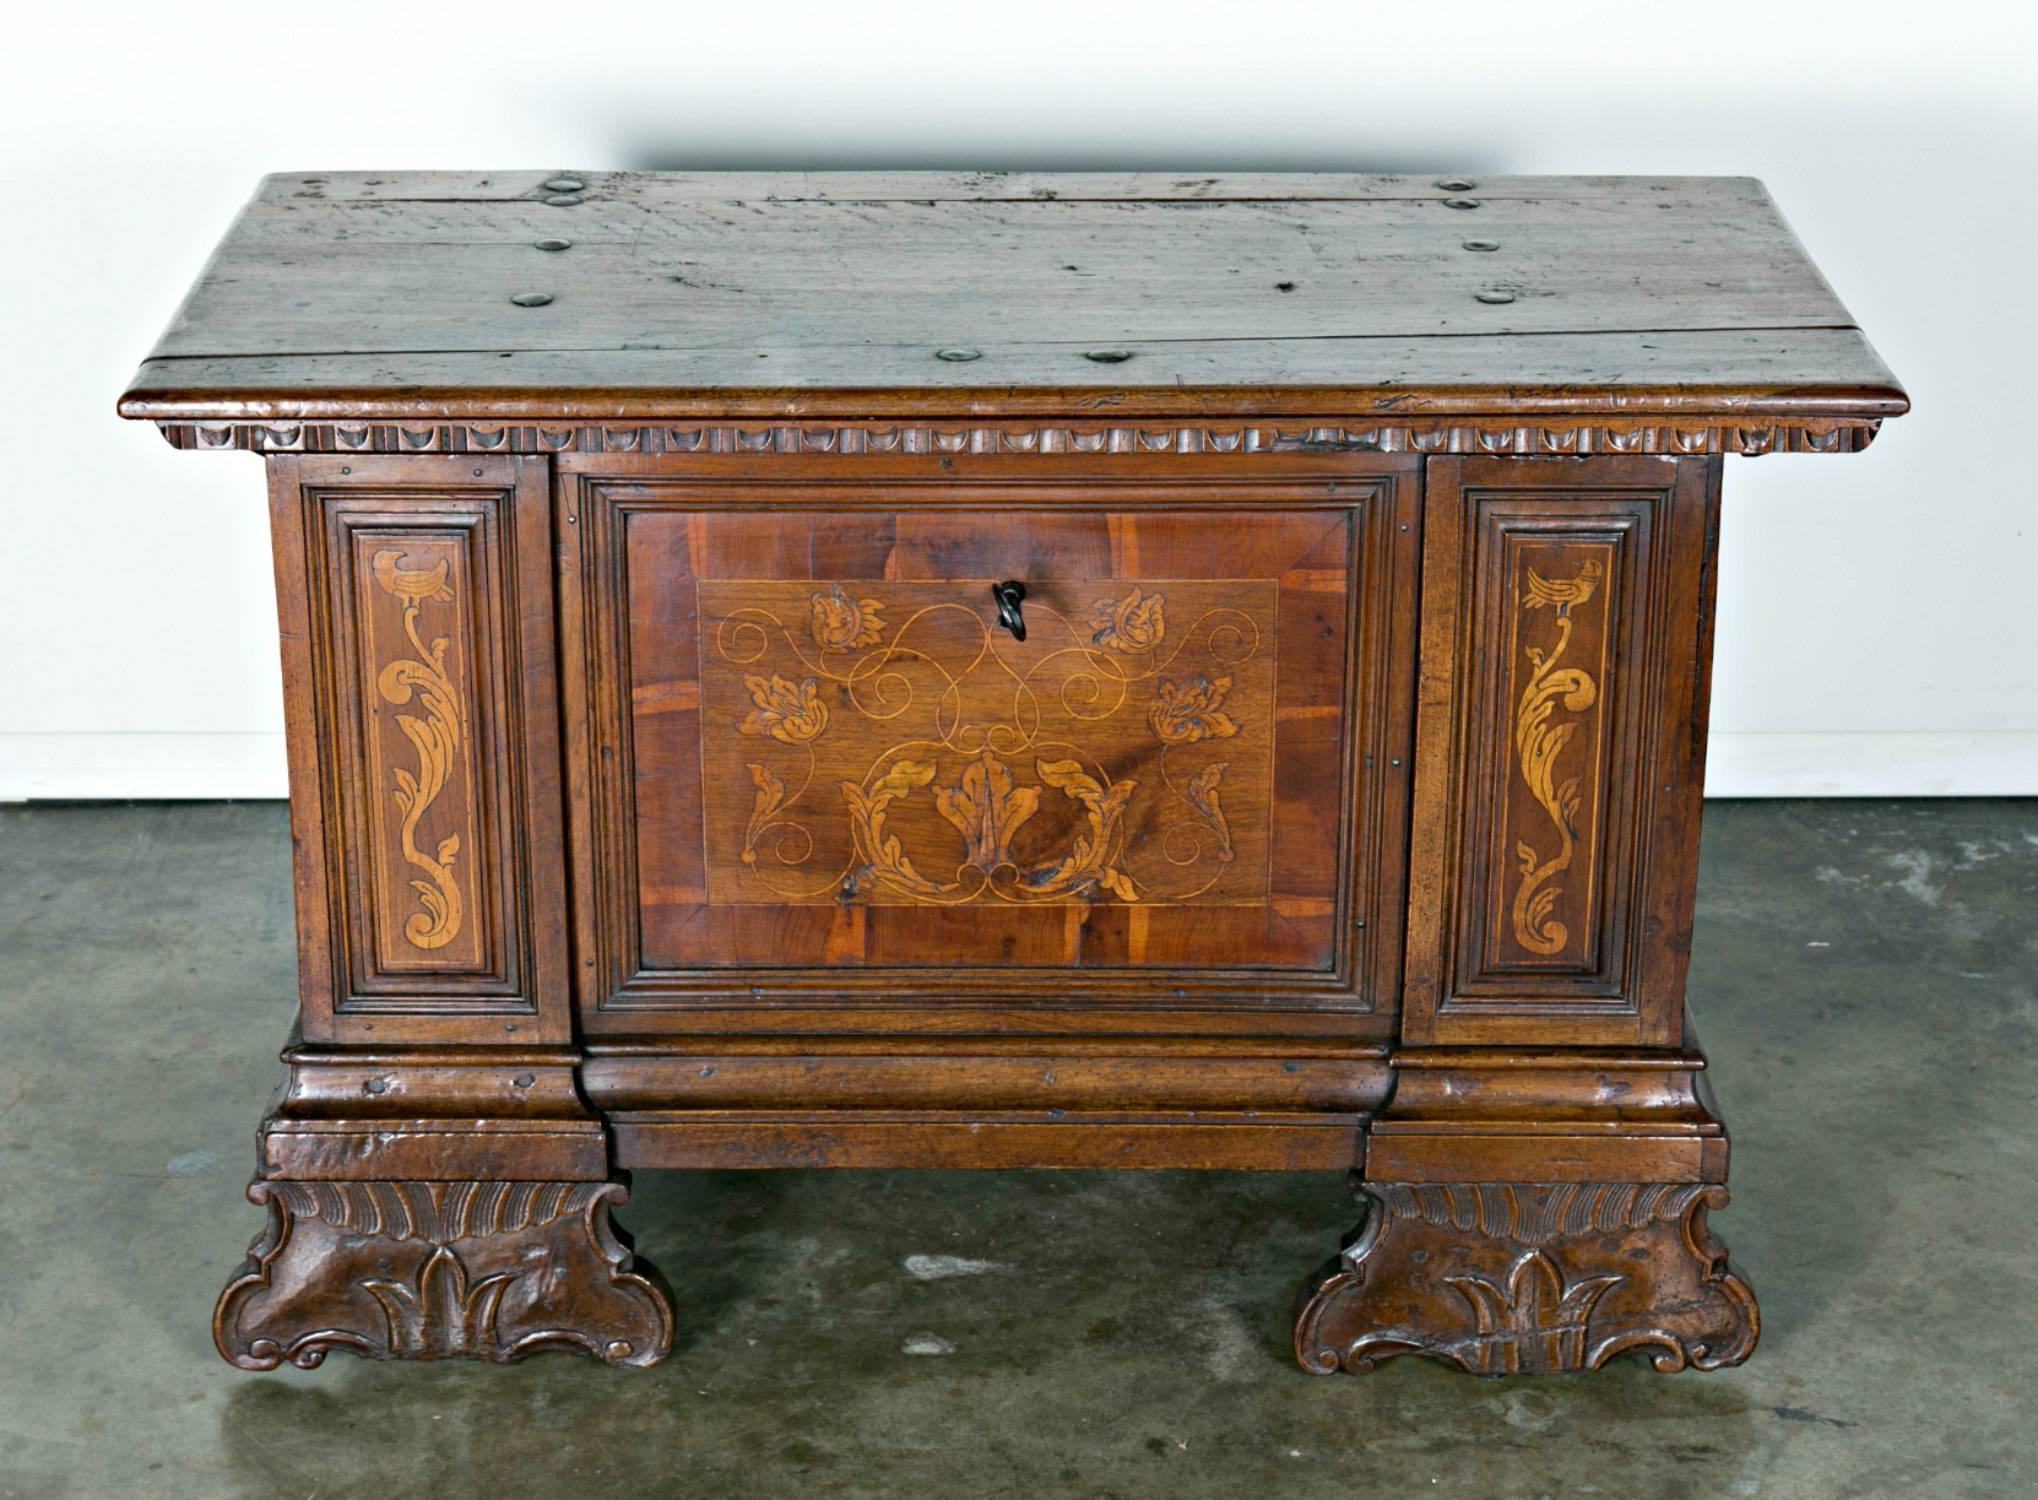 This rare, rectangular Italian cassone or trunk from the late 1600s is of solid carved walnut with intarsia-inlaid, string banding, having hand-forged iron fittings. The trunk rests upon two carved s-scroll feet and two back block feet. Original